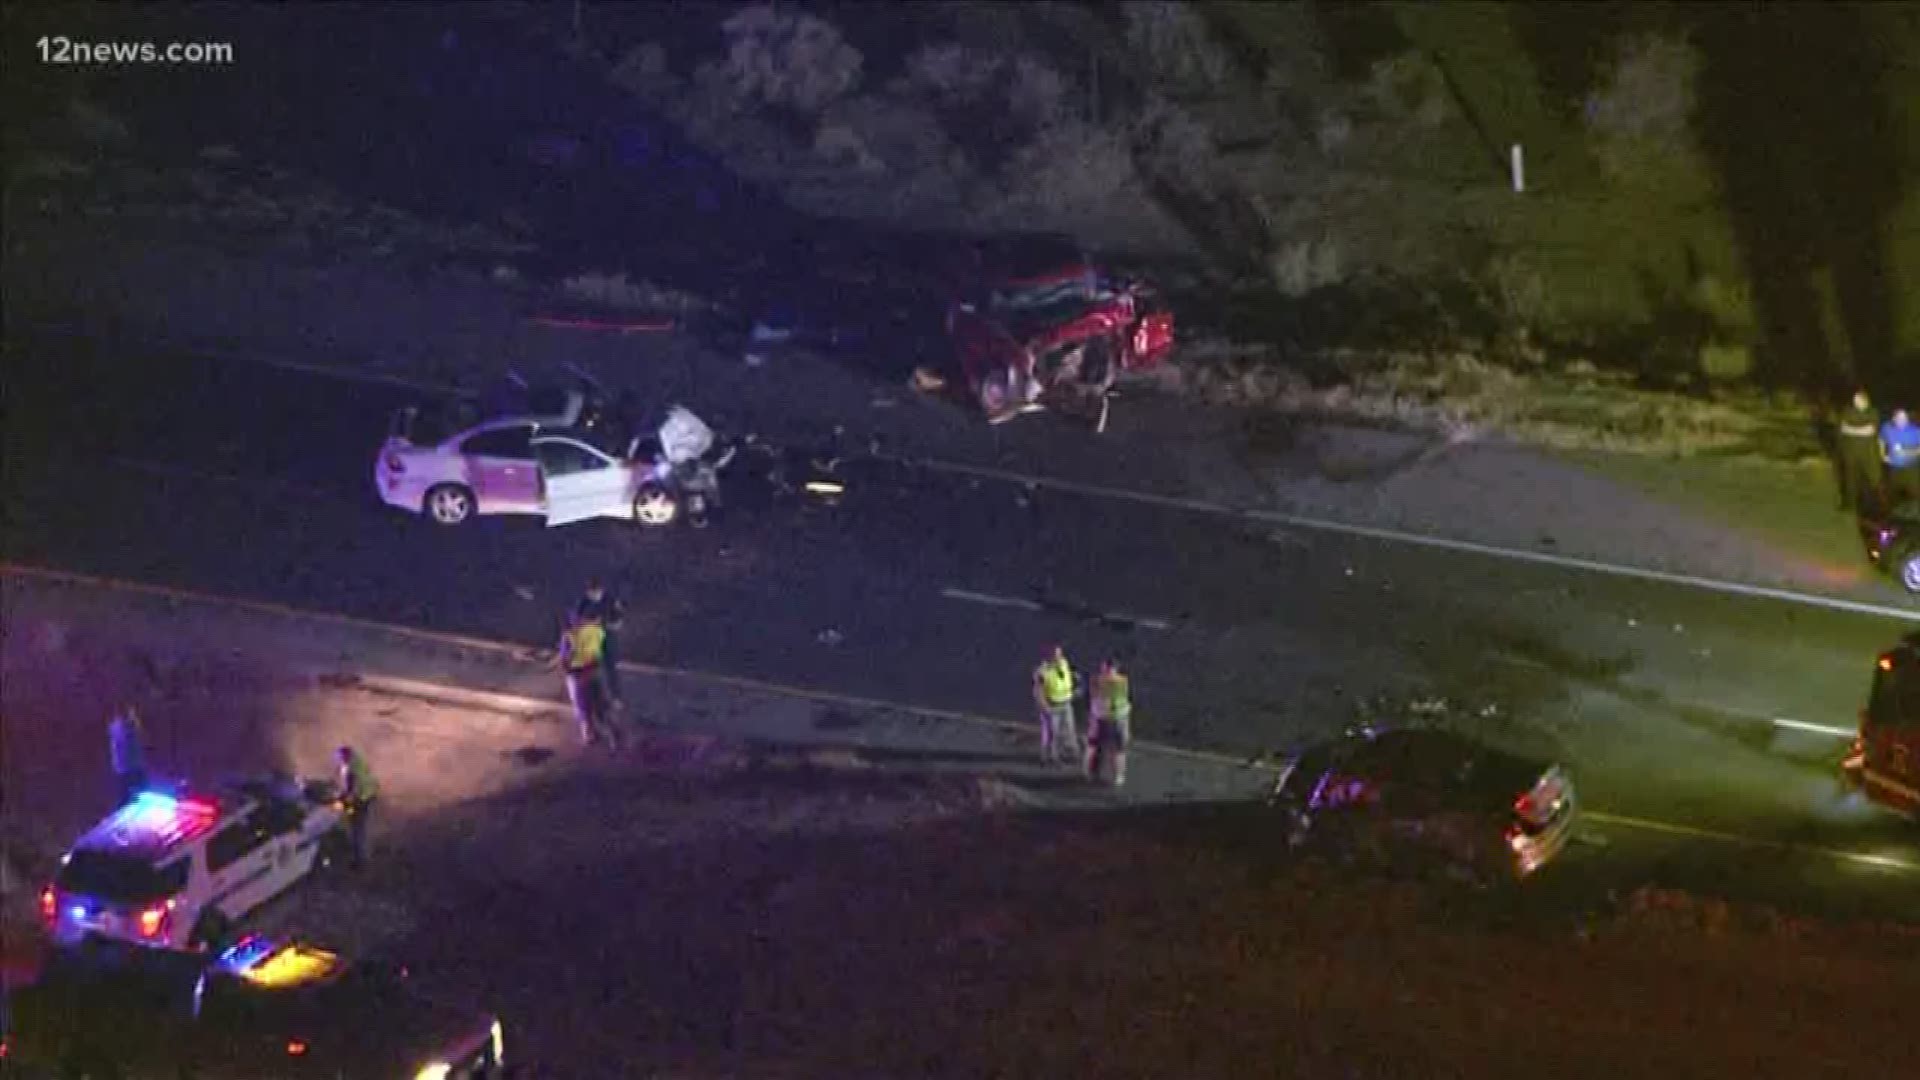 The vehicle that caused the crash was northbound in the southbound lanes, DPS said.